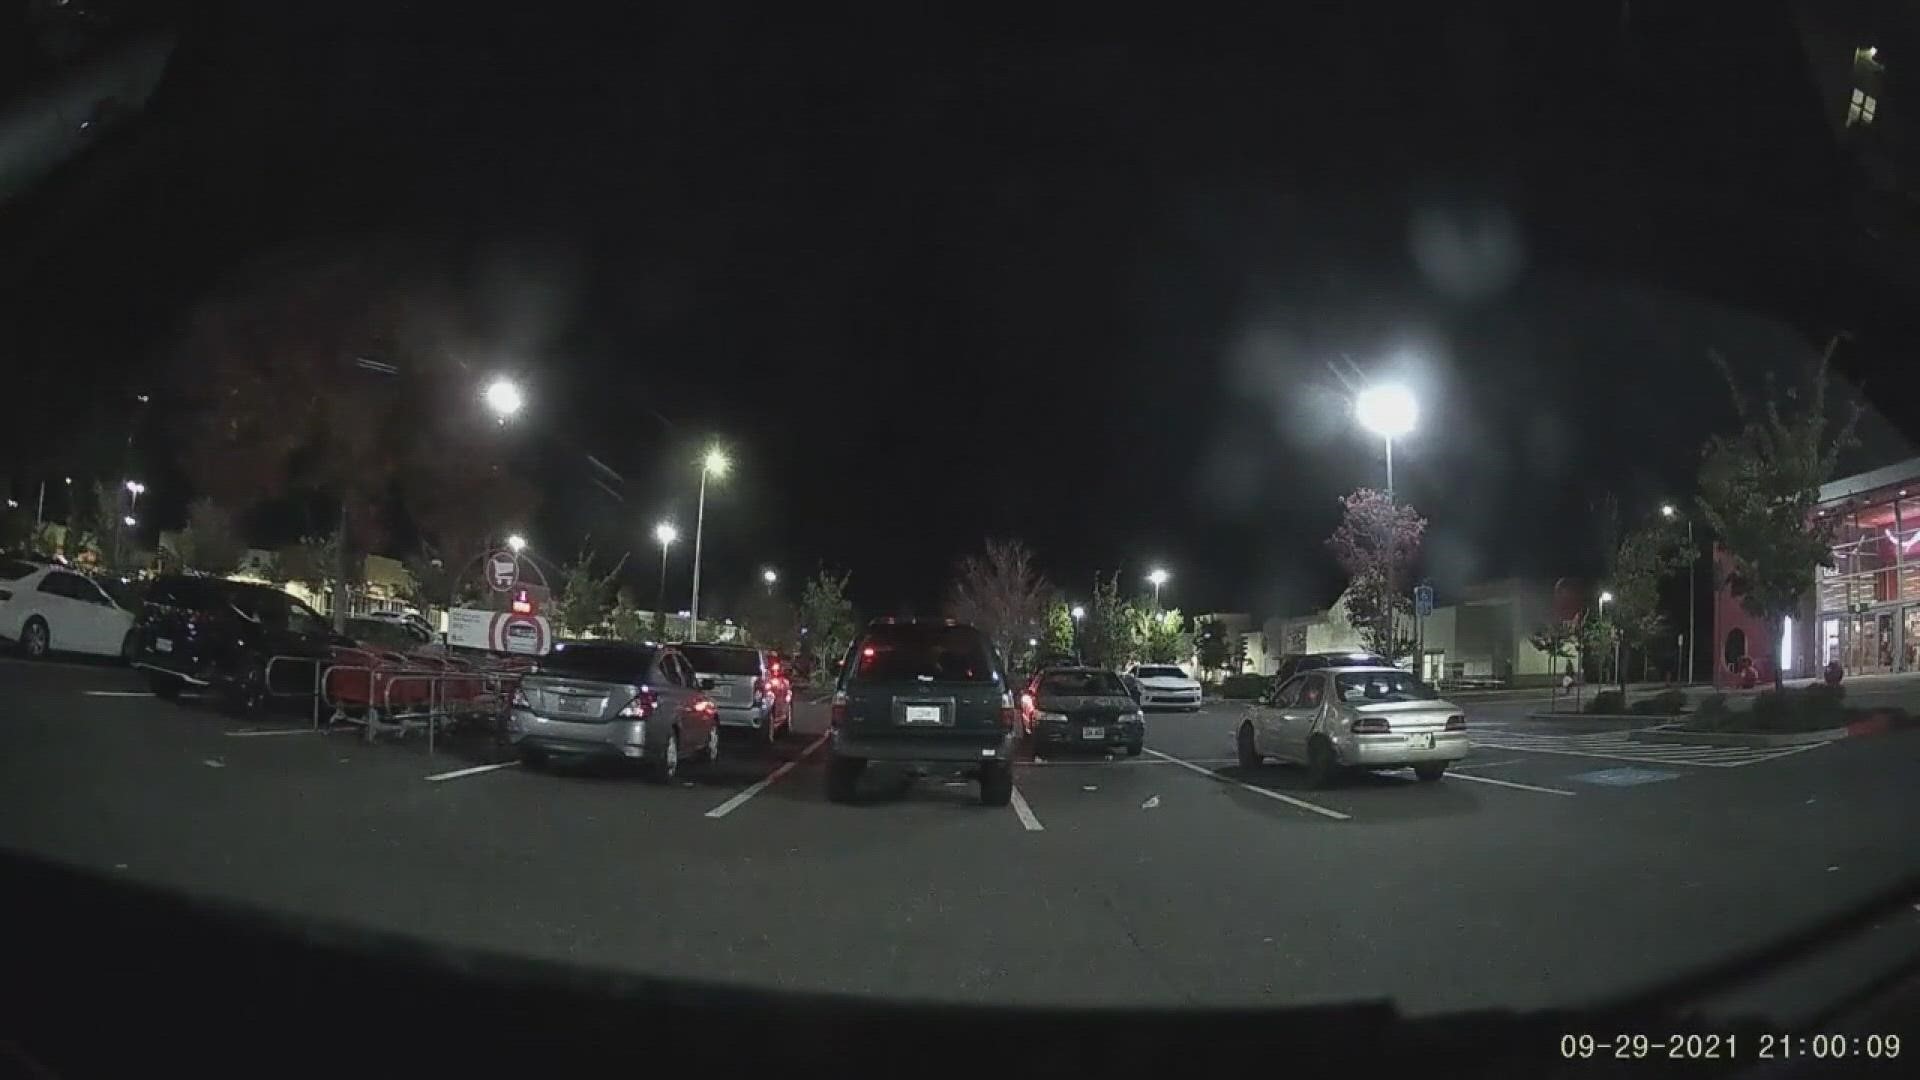 "I just see stuff getting loaded into a shopping cart," said the man who shot the video at a Portland Target. In 2021, there were 3,000+ shoplifting cases.